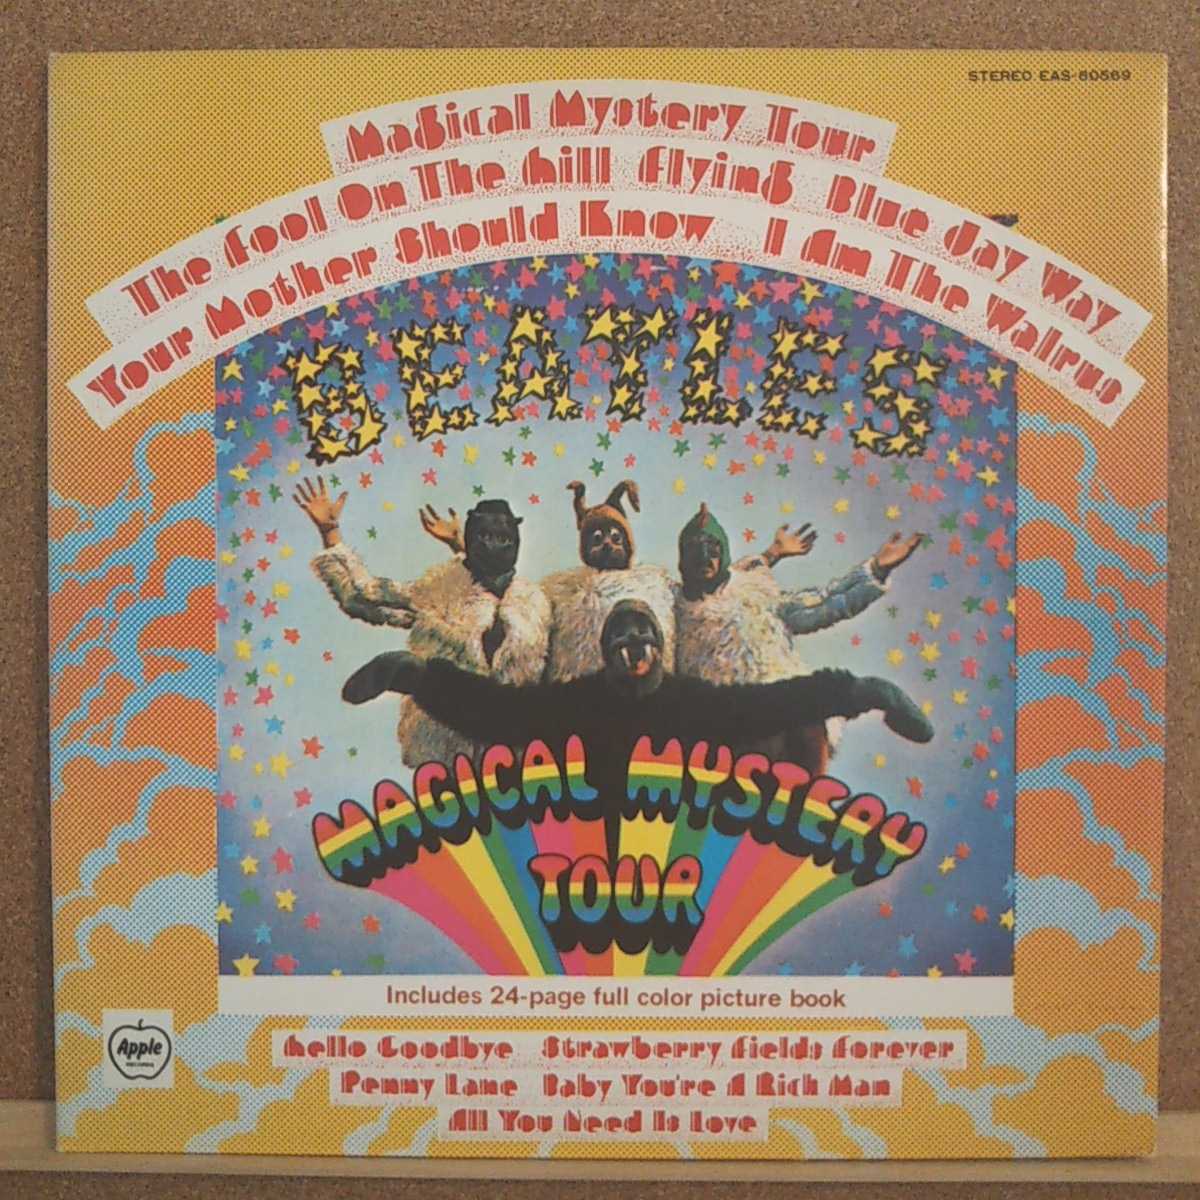 LP(picture book付き)ビートルズ THE BEATLES//マジカル・ミステリー・ツアー Magical MYSTERY TOUR【同梱可能6枚まで】_画像1